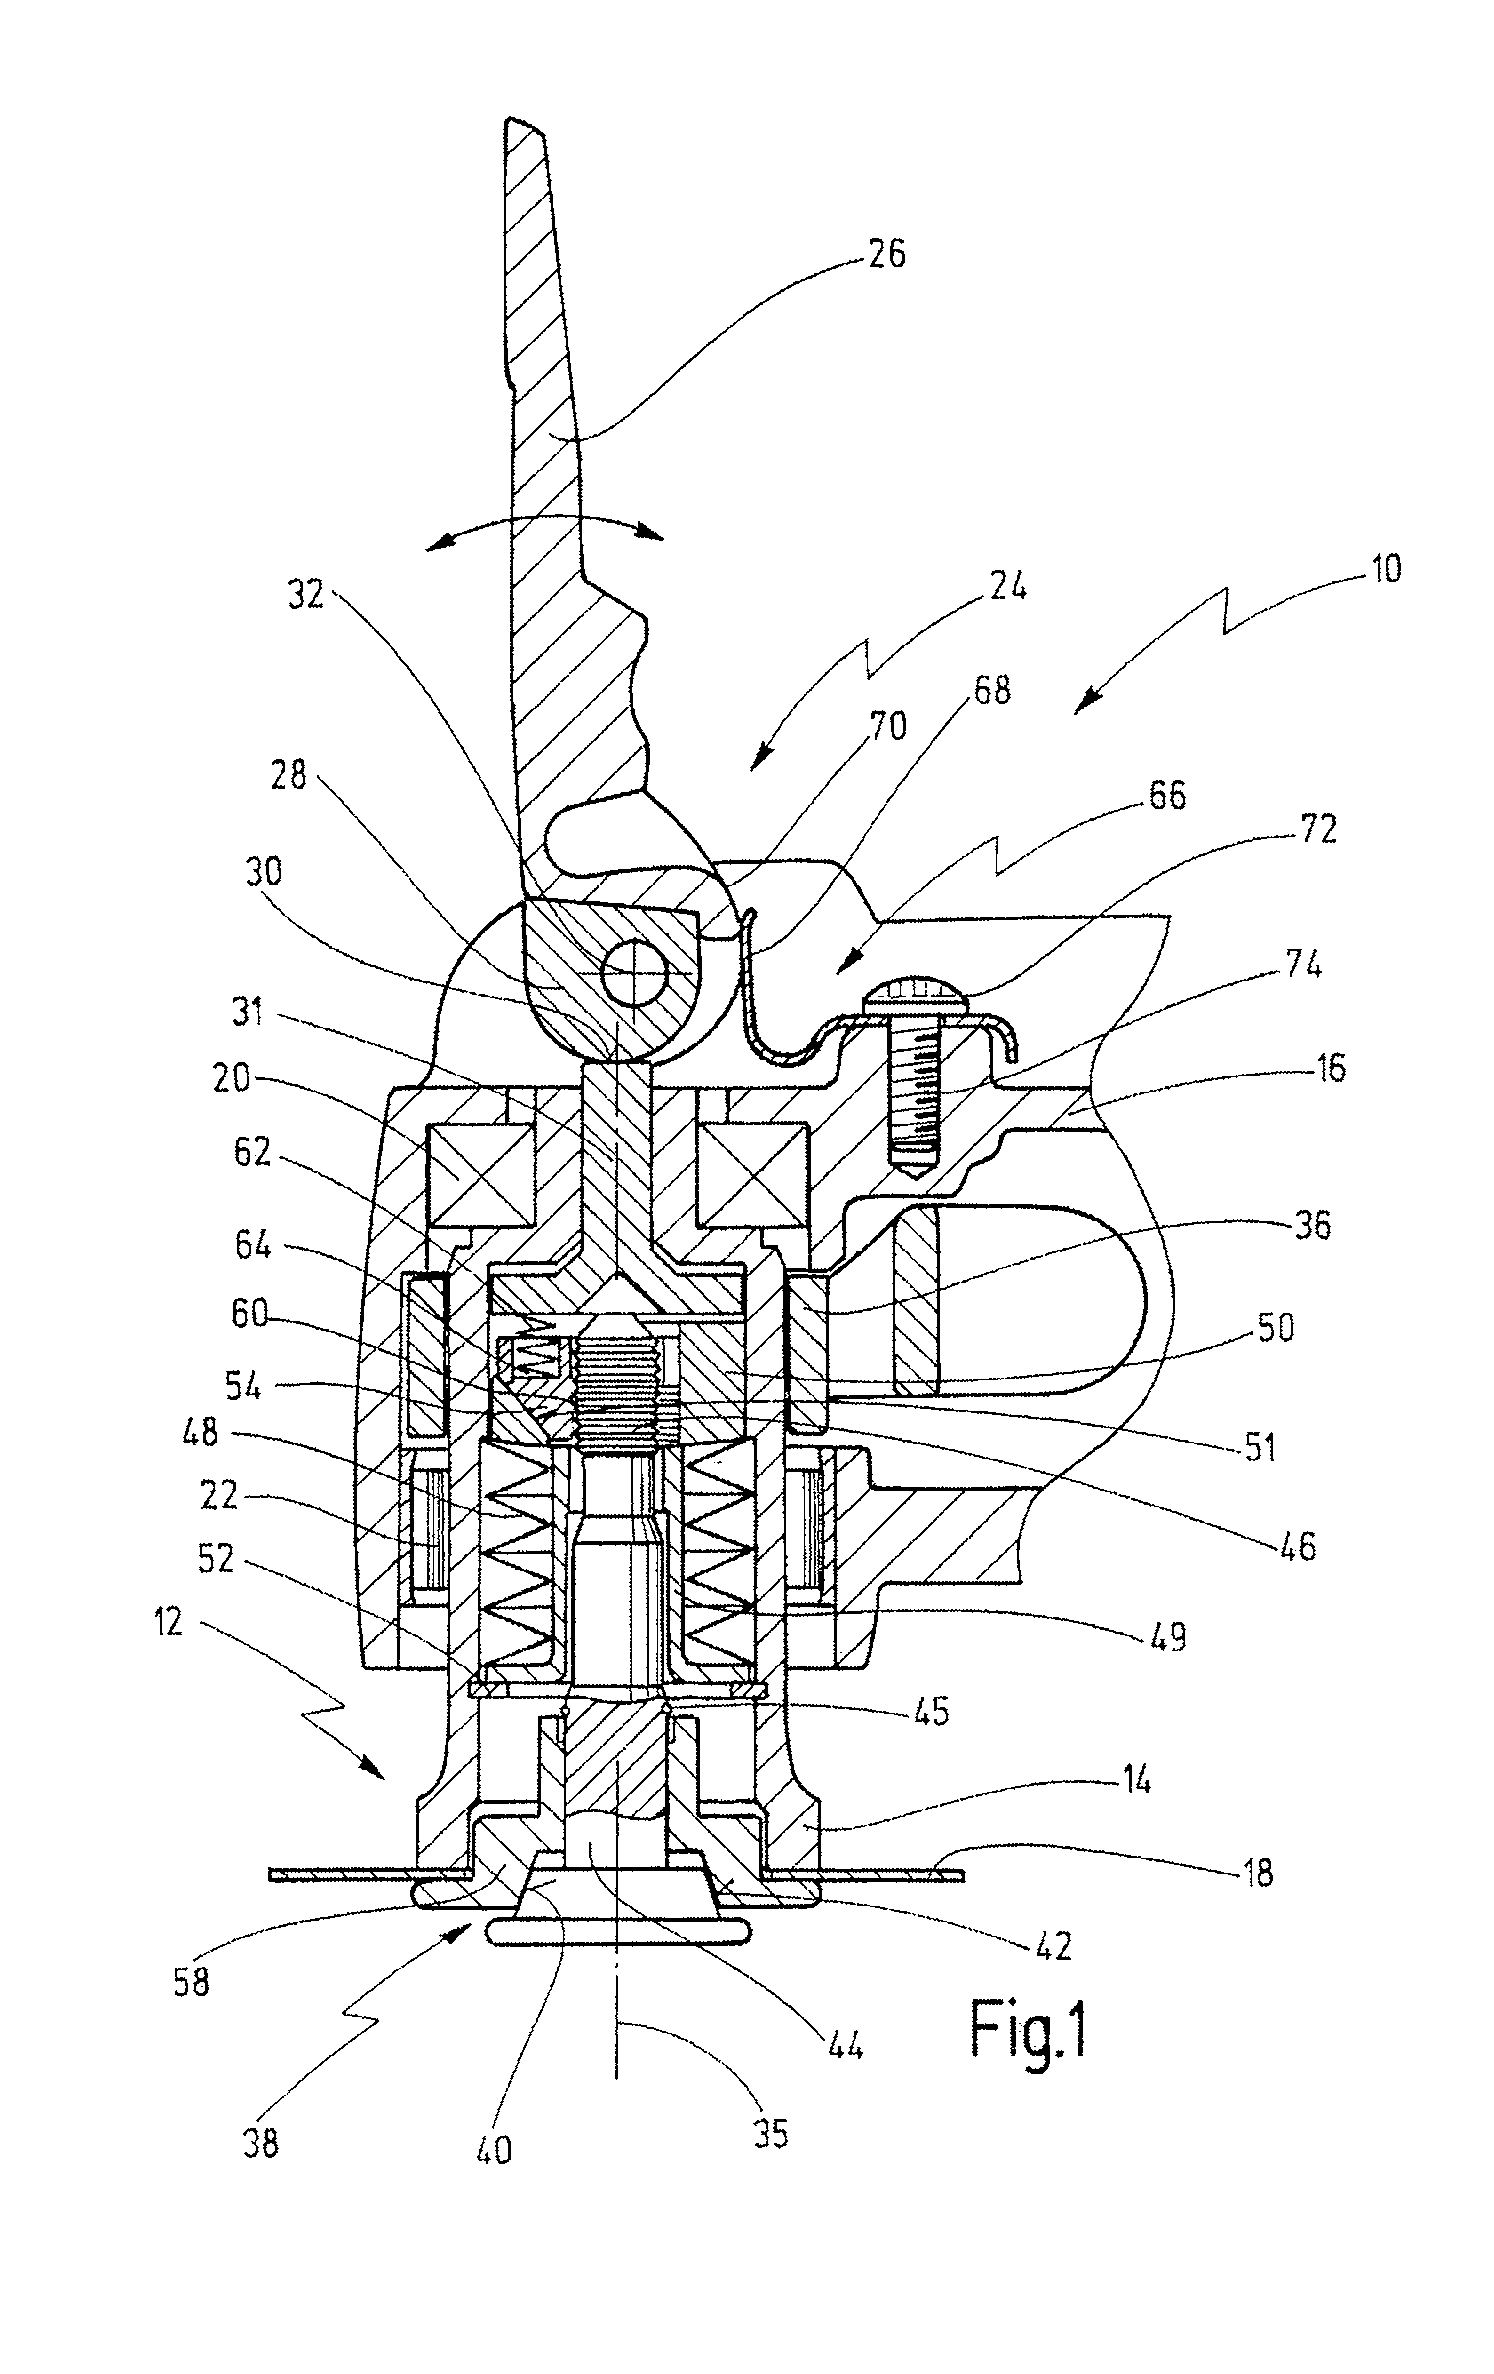 Power-Driven Hand Tool With Clamping Fixture For A Tool